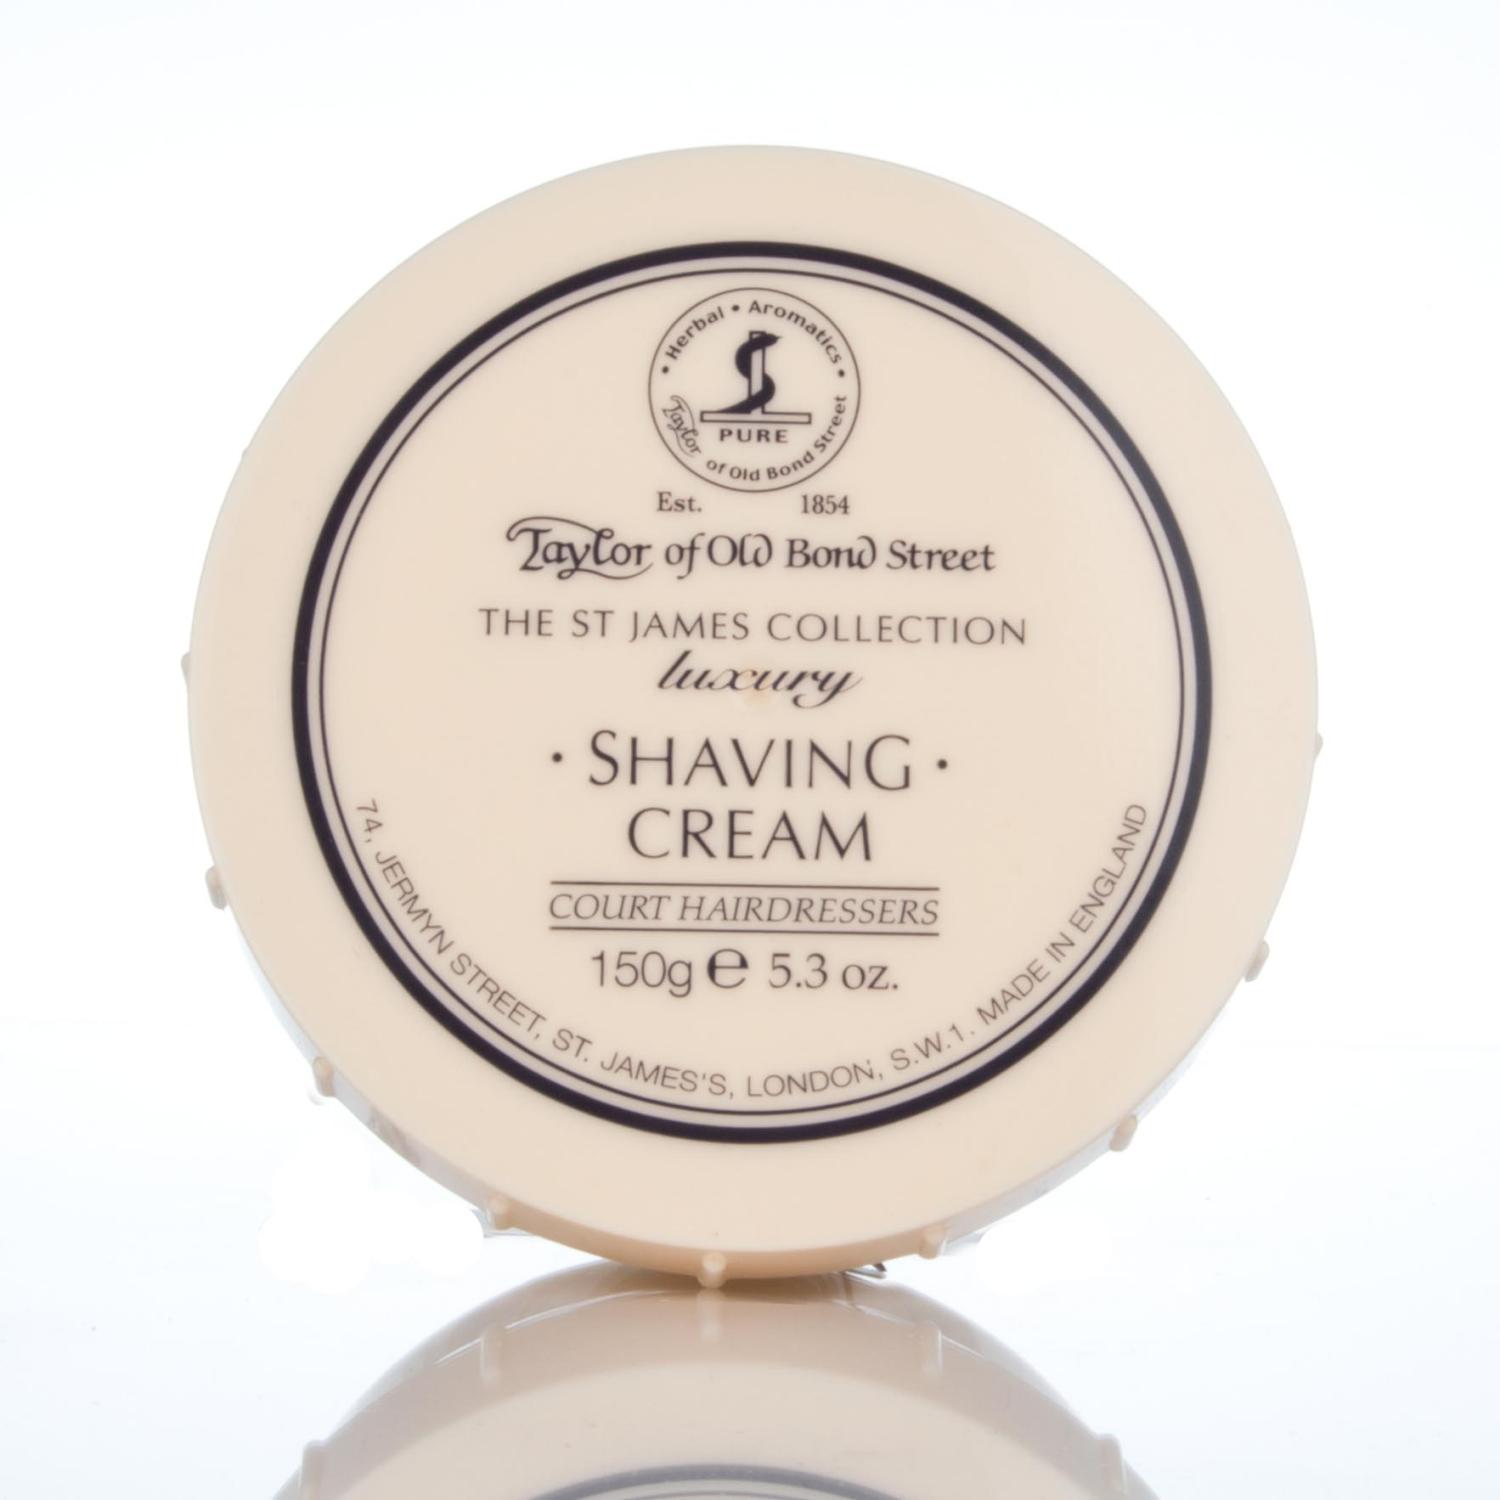 Taylor St James Collection luxury Shaving Cream